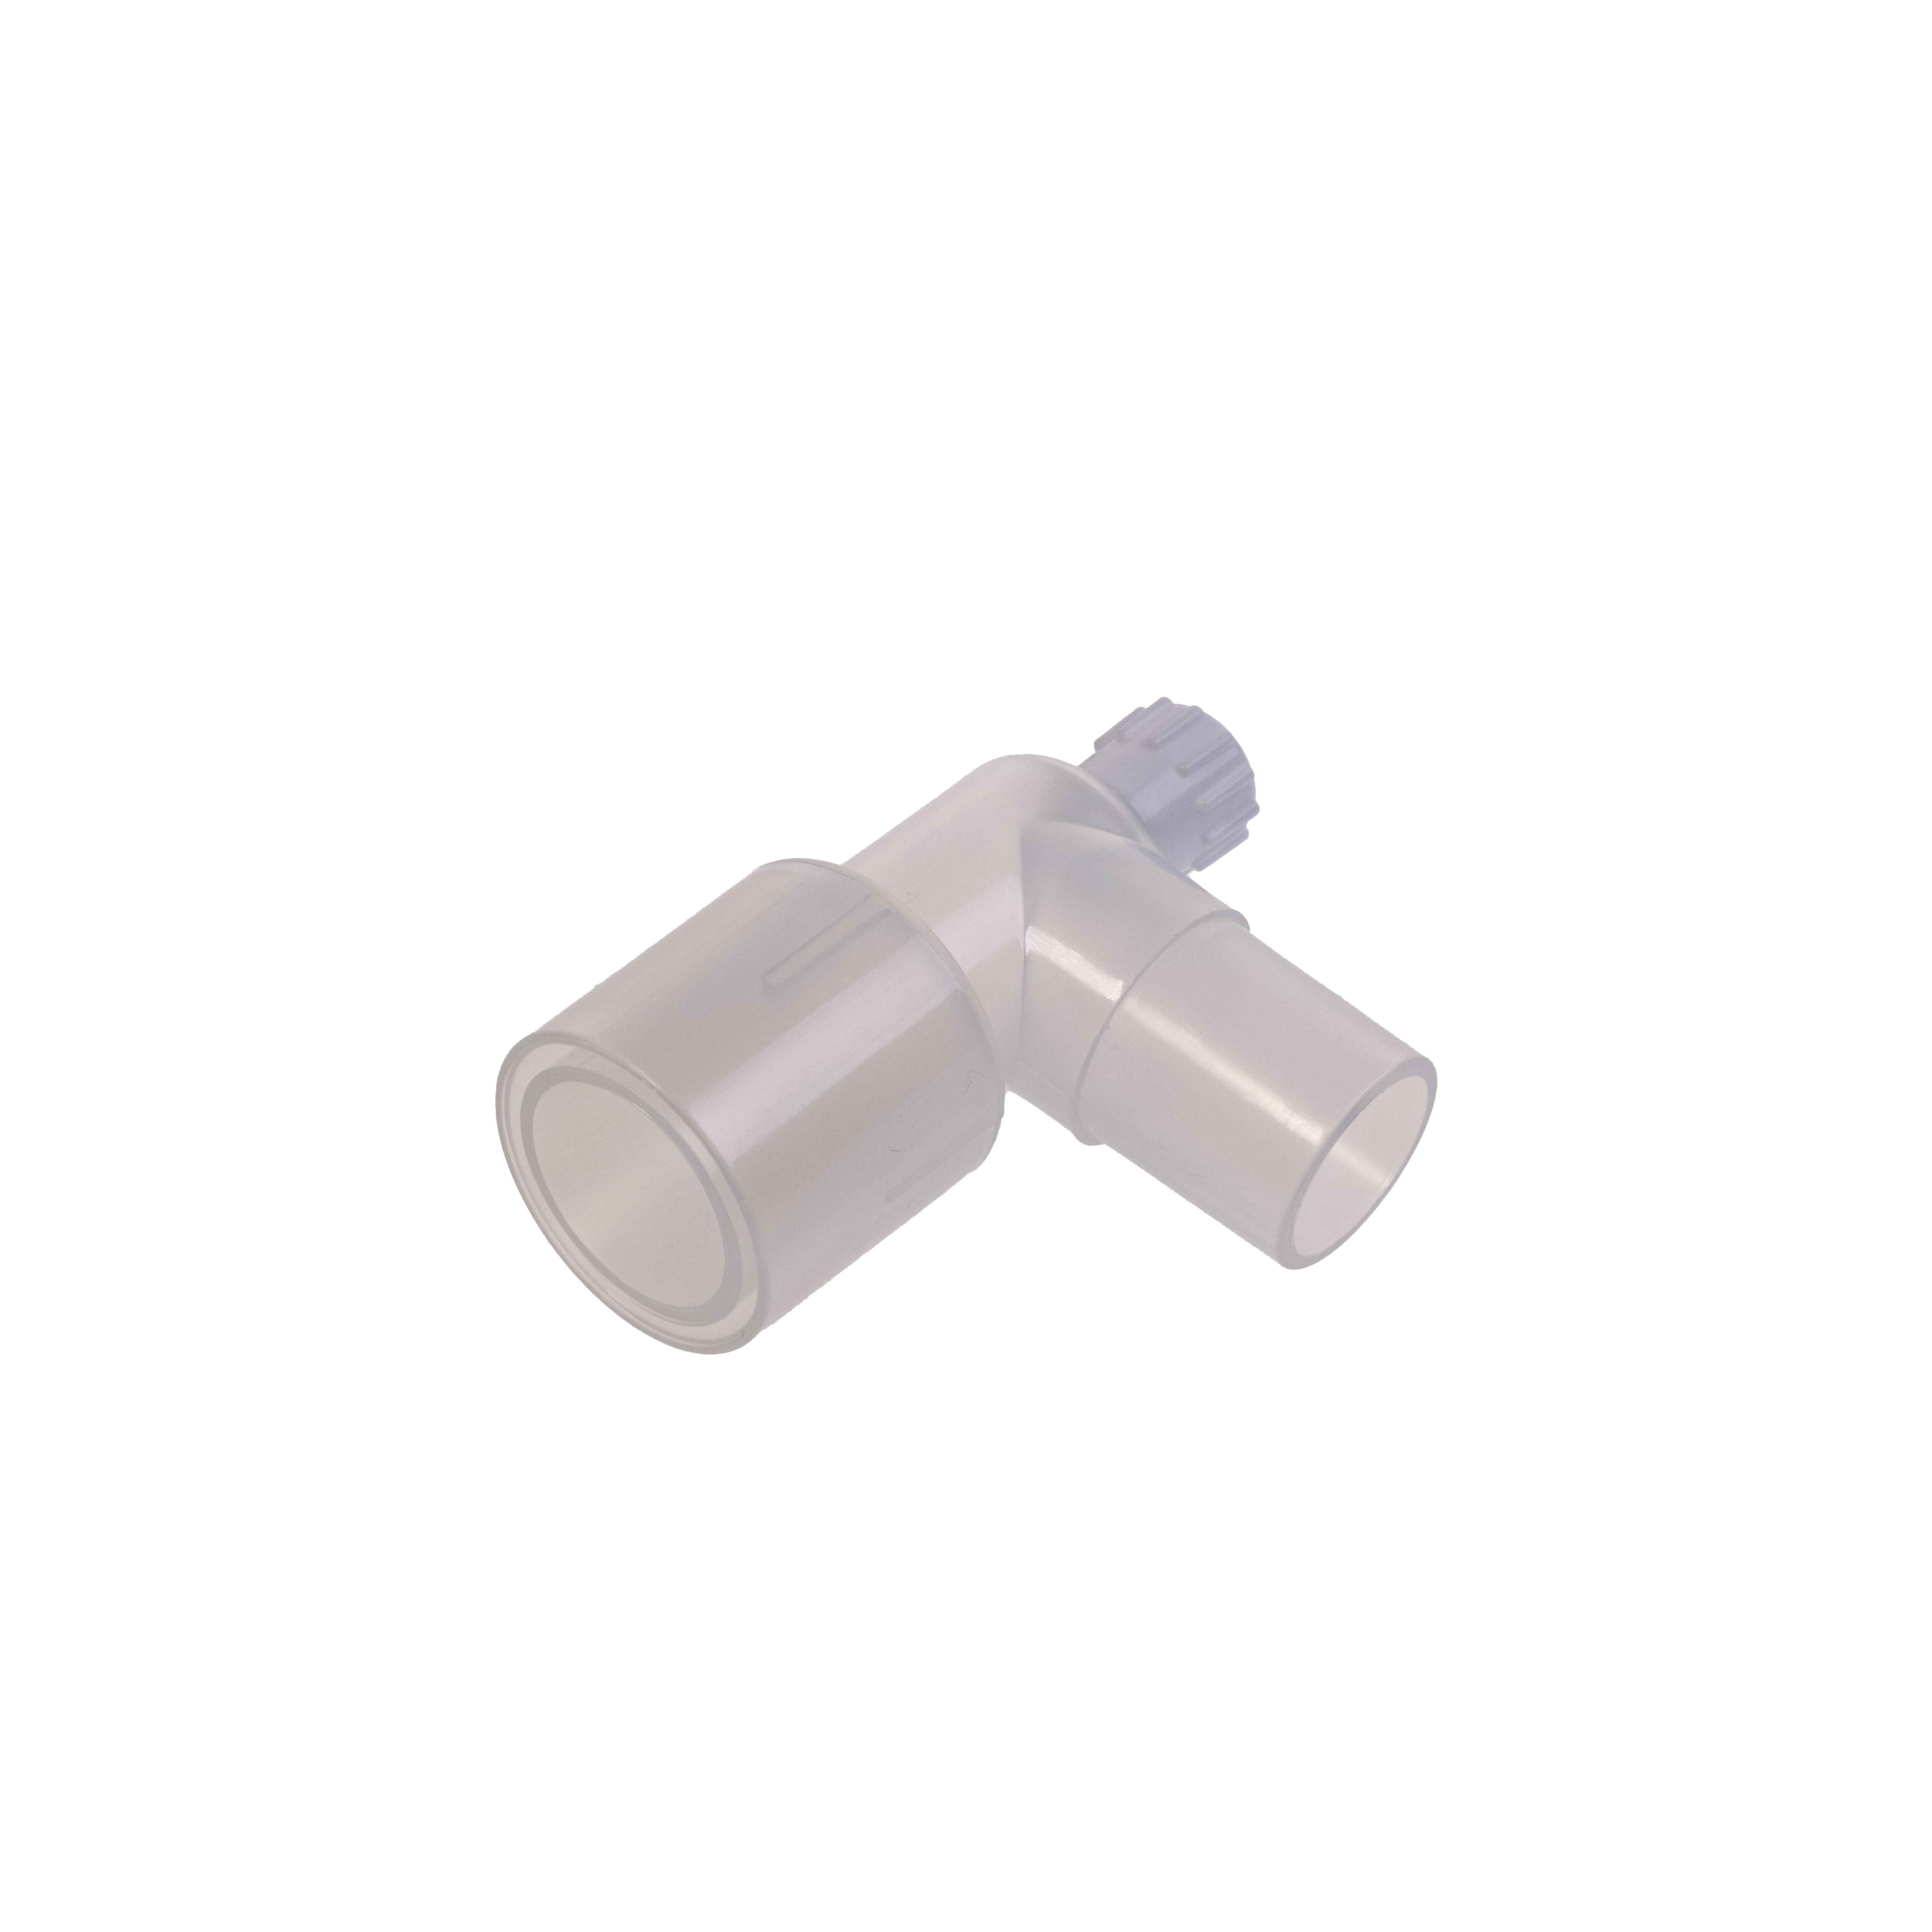 Airway Elbow Adapter Disposable Package of 10 Pieces